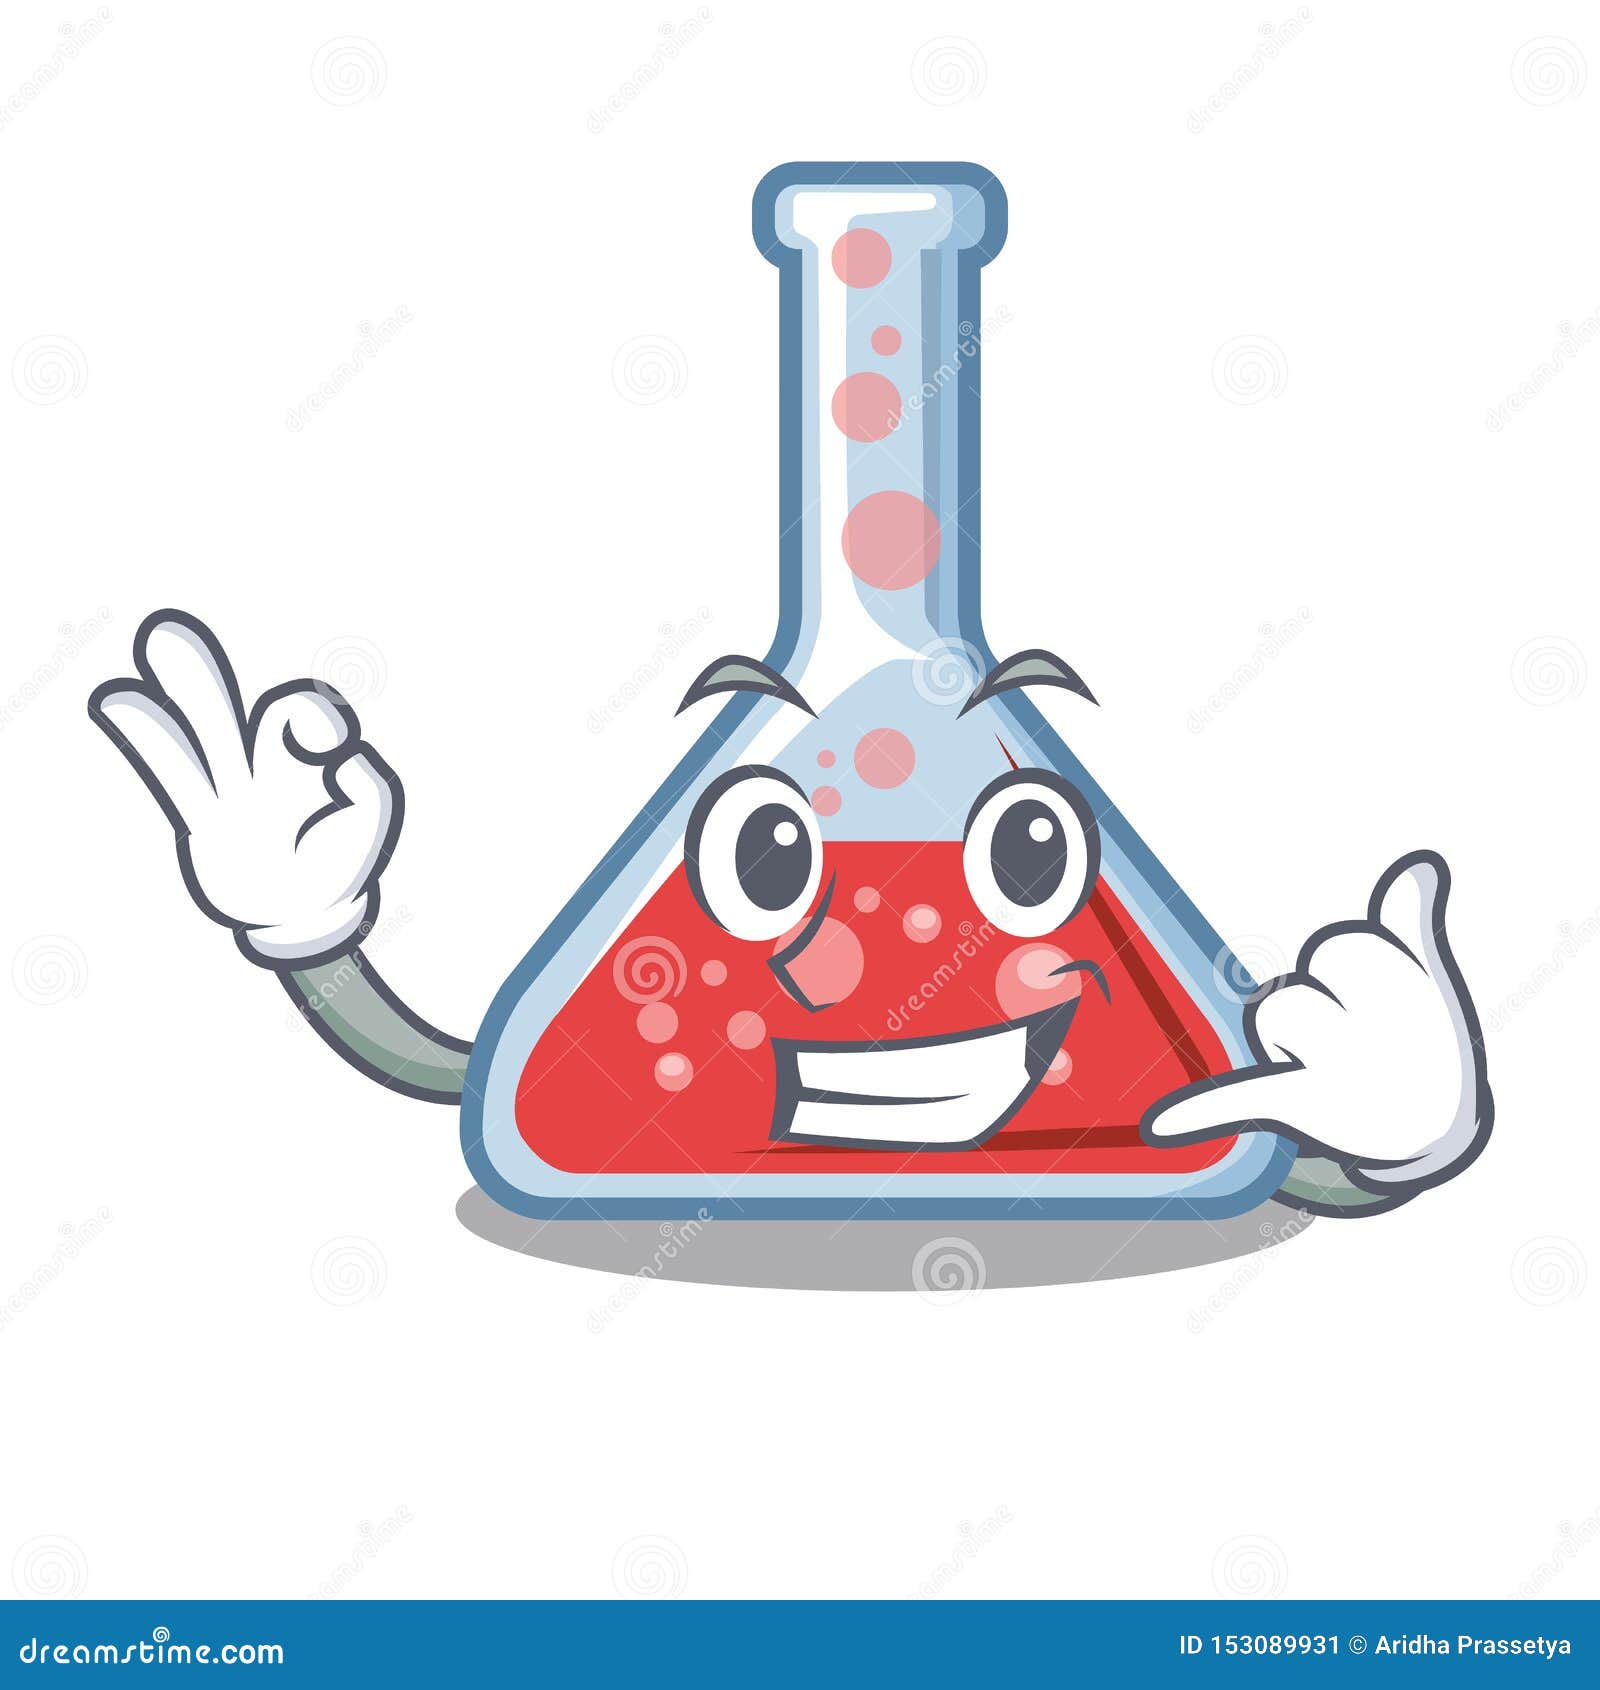 Call Me Erlenmeyer Flask in Cartoon Lab Room Stock Vector - Illustration of  glassware, cute: 153089931